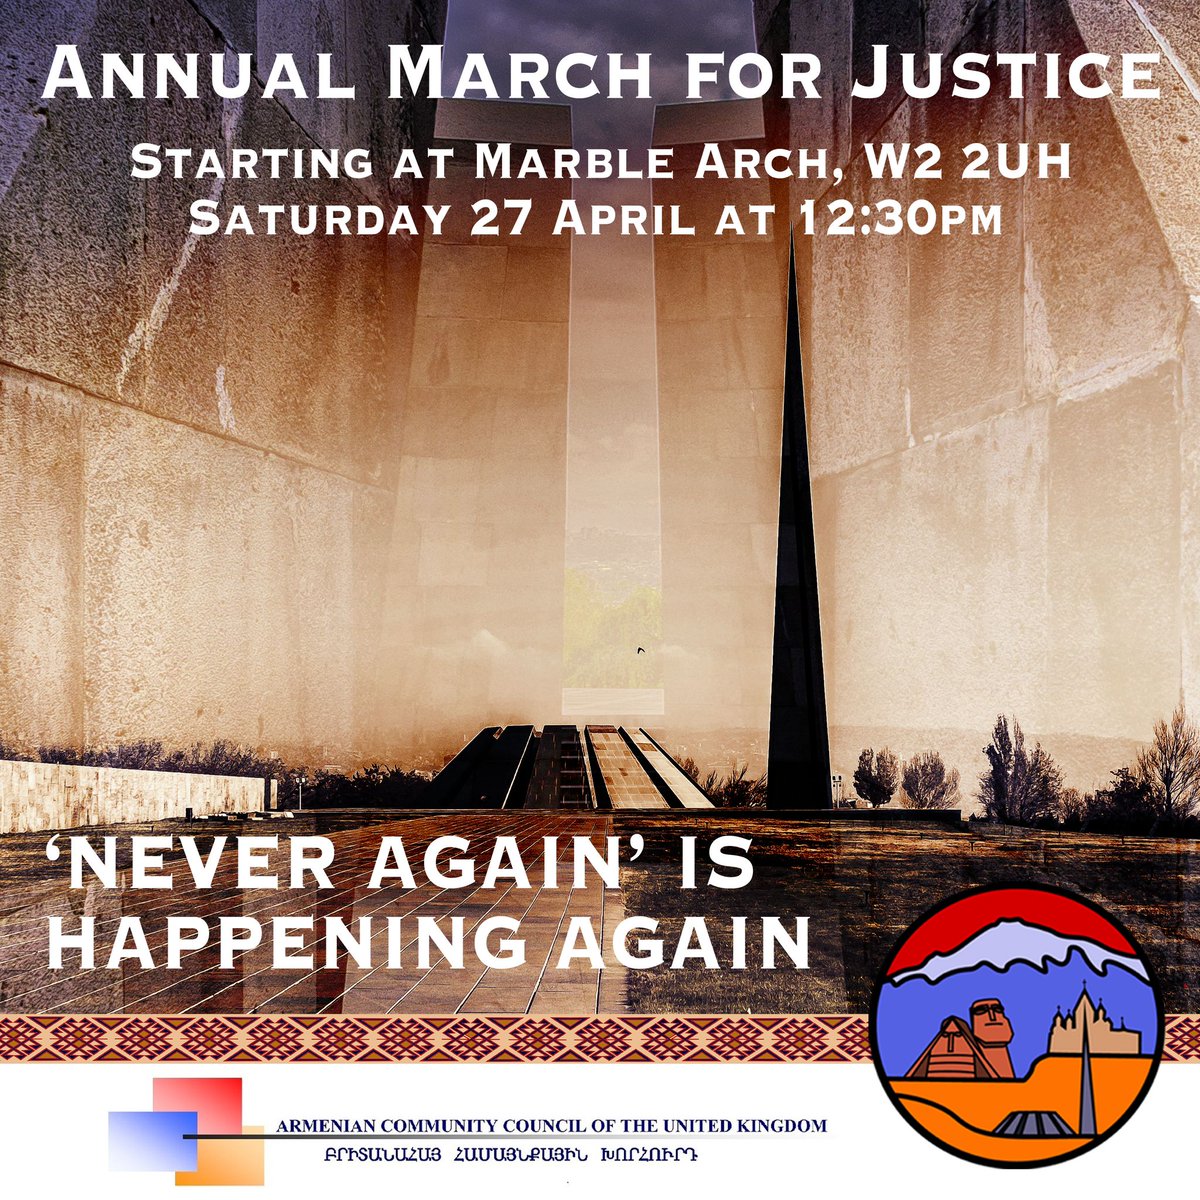 Annual March for Justice on the 109th Anniversary of the Armenian Genocide: Starting at Marble Arch, W2 2UH. Saturday 27 April at 12:30 PM.